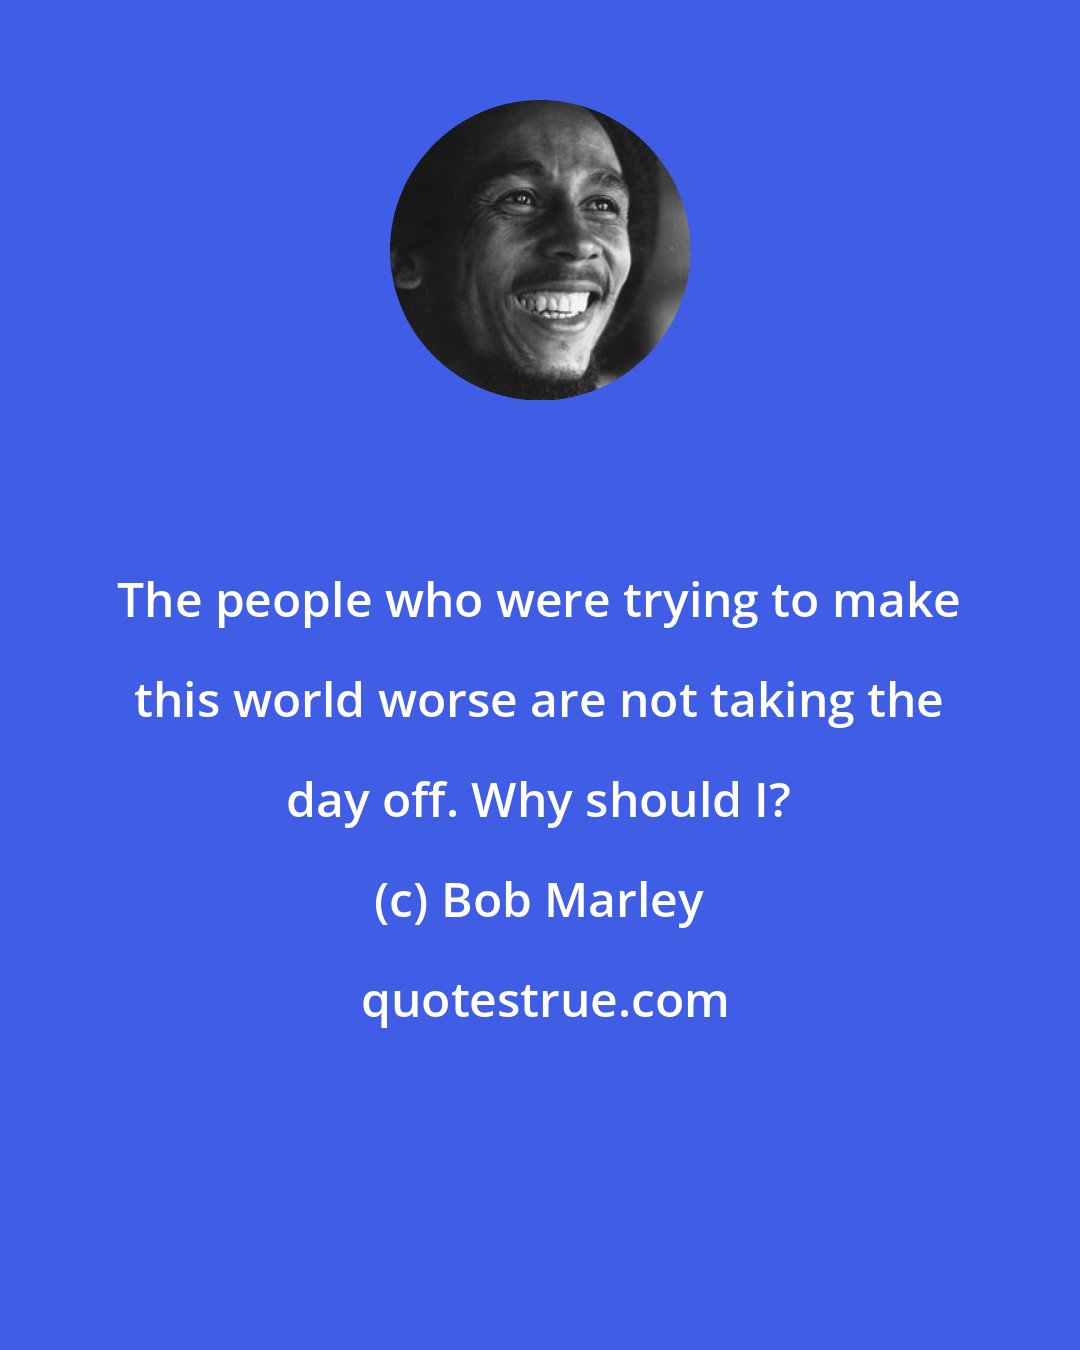 Bob Marley: The people who were trying to make this world worse are not taking the day off. Why should I?